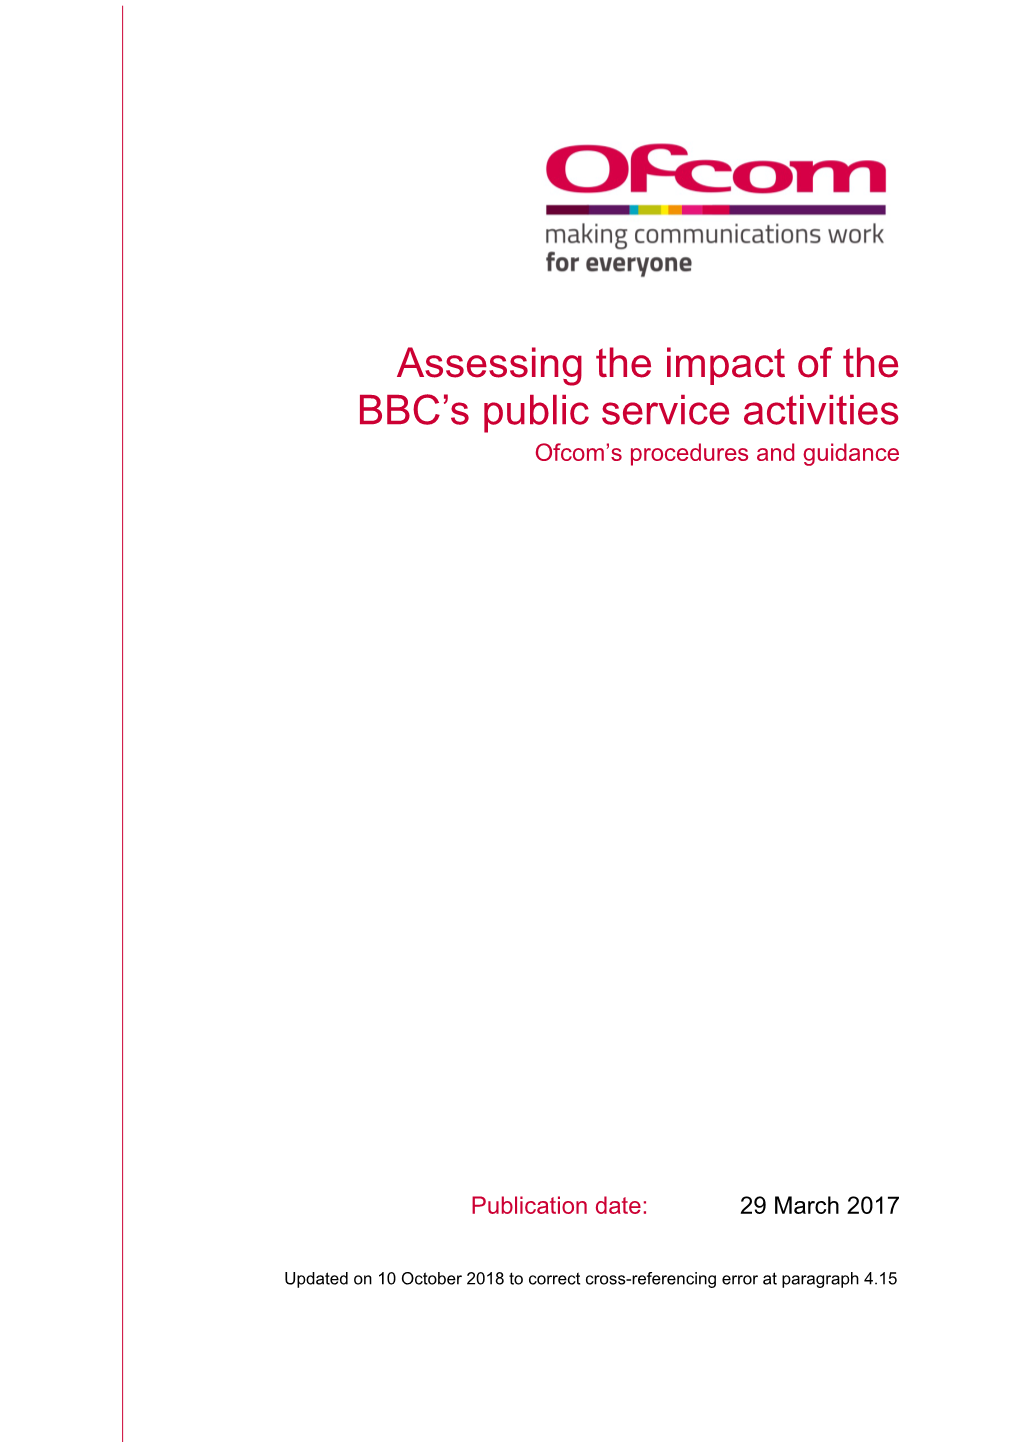 Assessing the Impact of the BBC's Public Service Activities